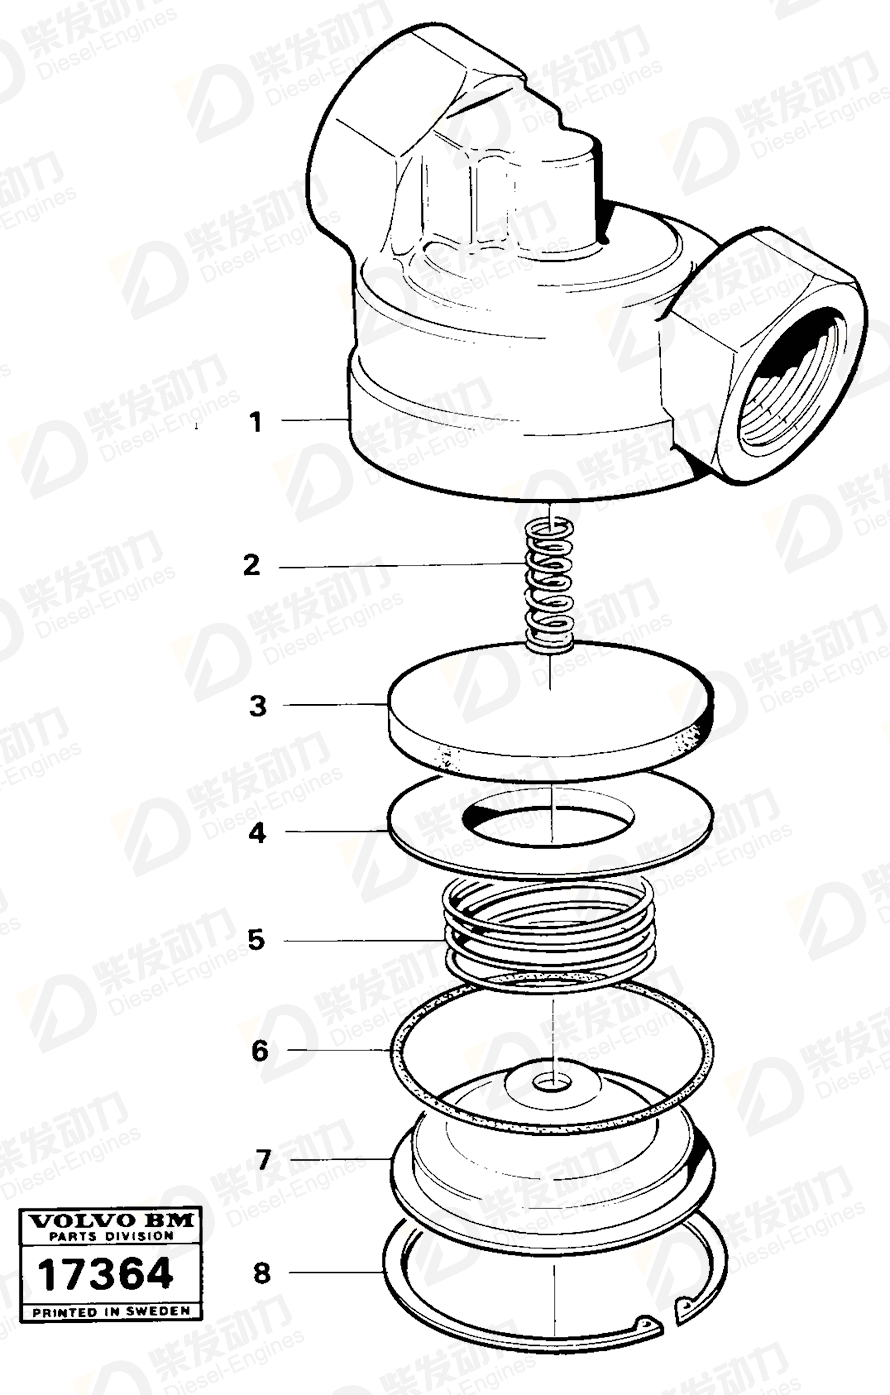 VOLVO Support washer 362420 Drawing